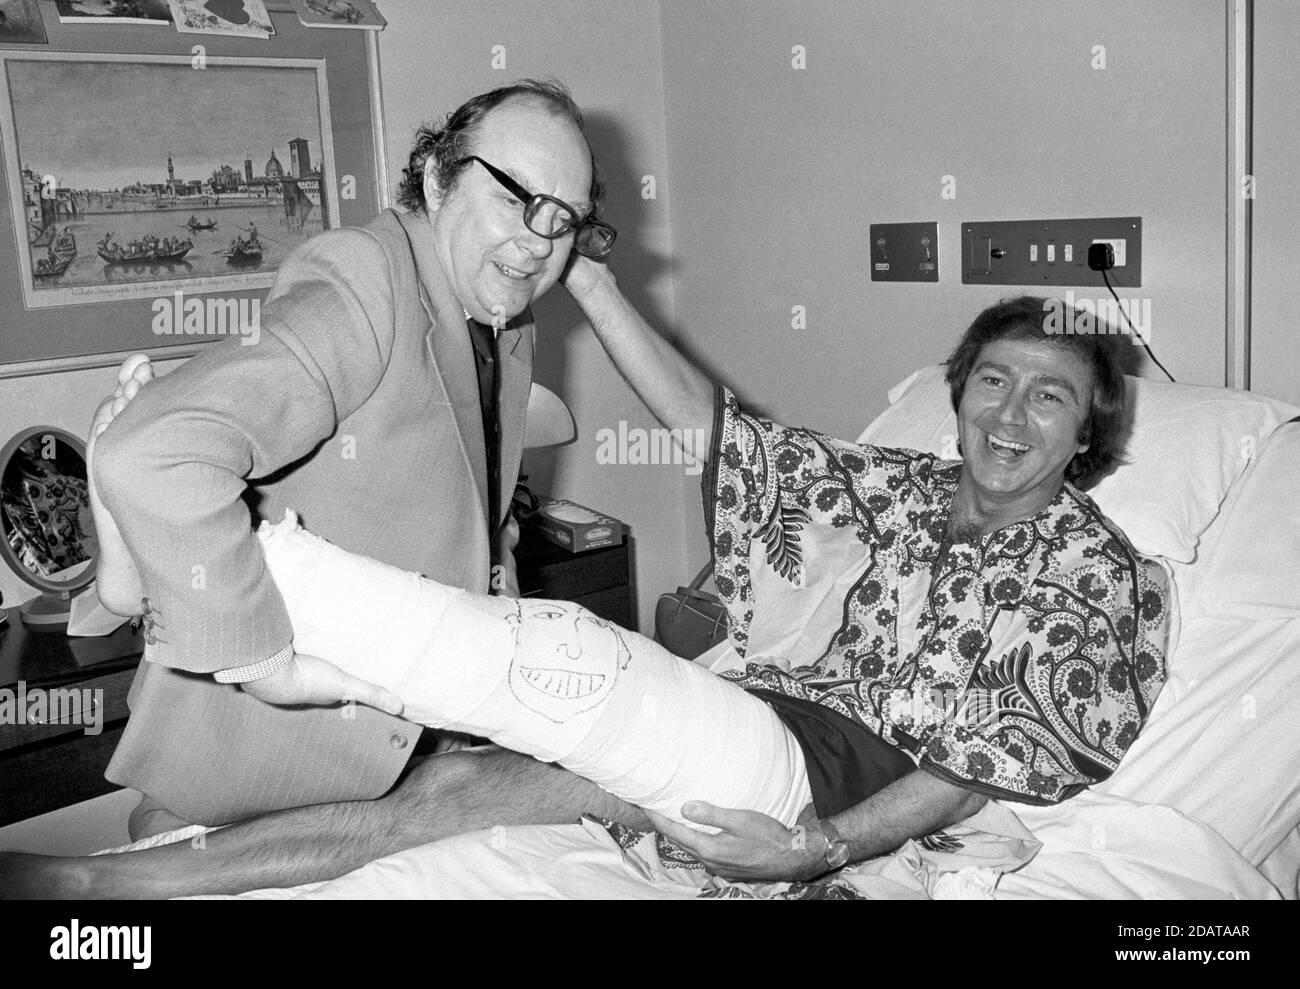 File photo dated 27/02/78 of veteran entertainer Des O'Connor (right) with Eric Morecambe, in the Wellington Hospital, London. Des O'Connor, who sadly passed away on Saturday 14 November aged 88. His agent confirmed he had been admitted to hospital just over a week ago, following a fall at his home in Buckinghamshire. Unfortunately yesterday evening his condition suddenly deteriorated and he drifted peacefully away in his sleep. Stock Photo